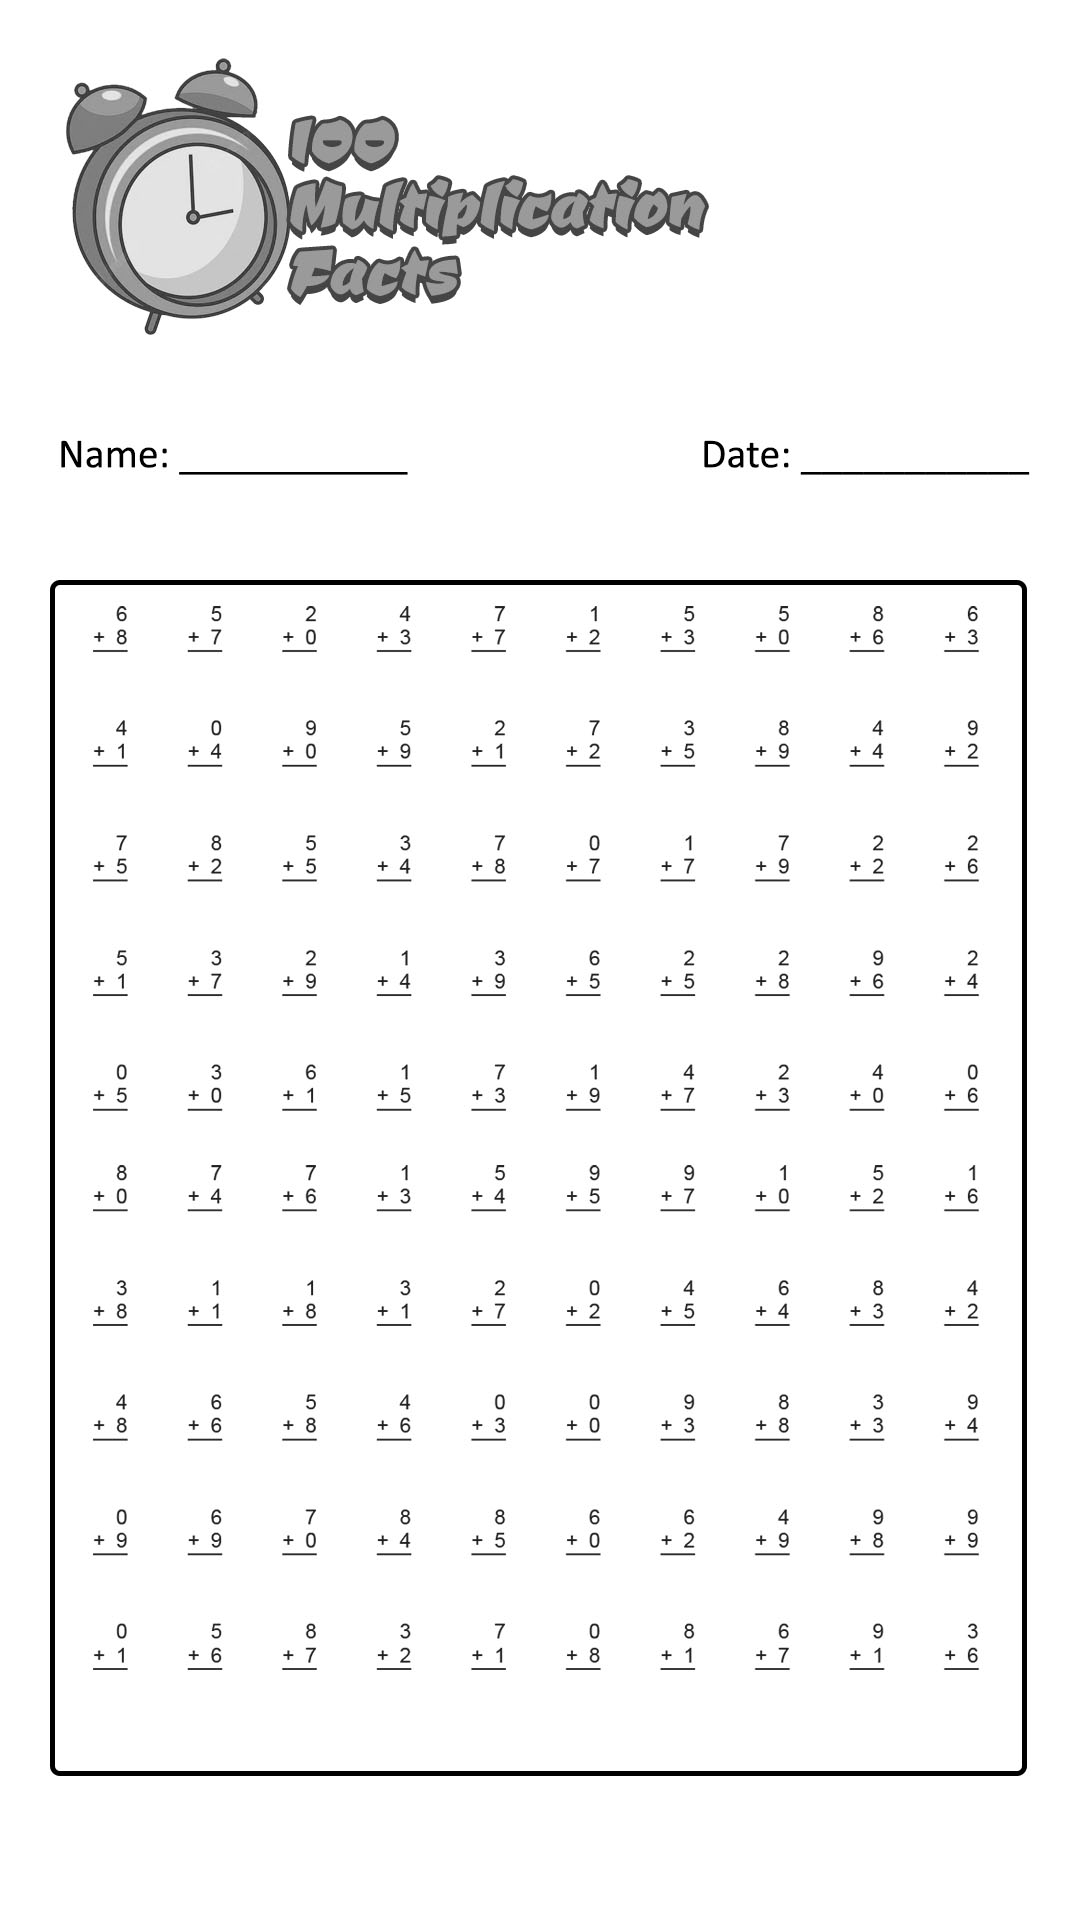 100-vertical-questions-multiplication-facts-1-91-10-a-free-timed-multiplication-worksheets-0-3